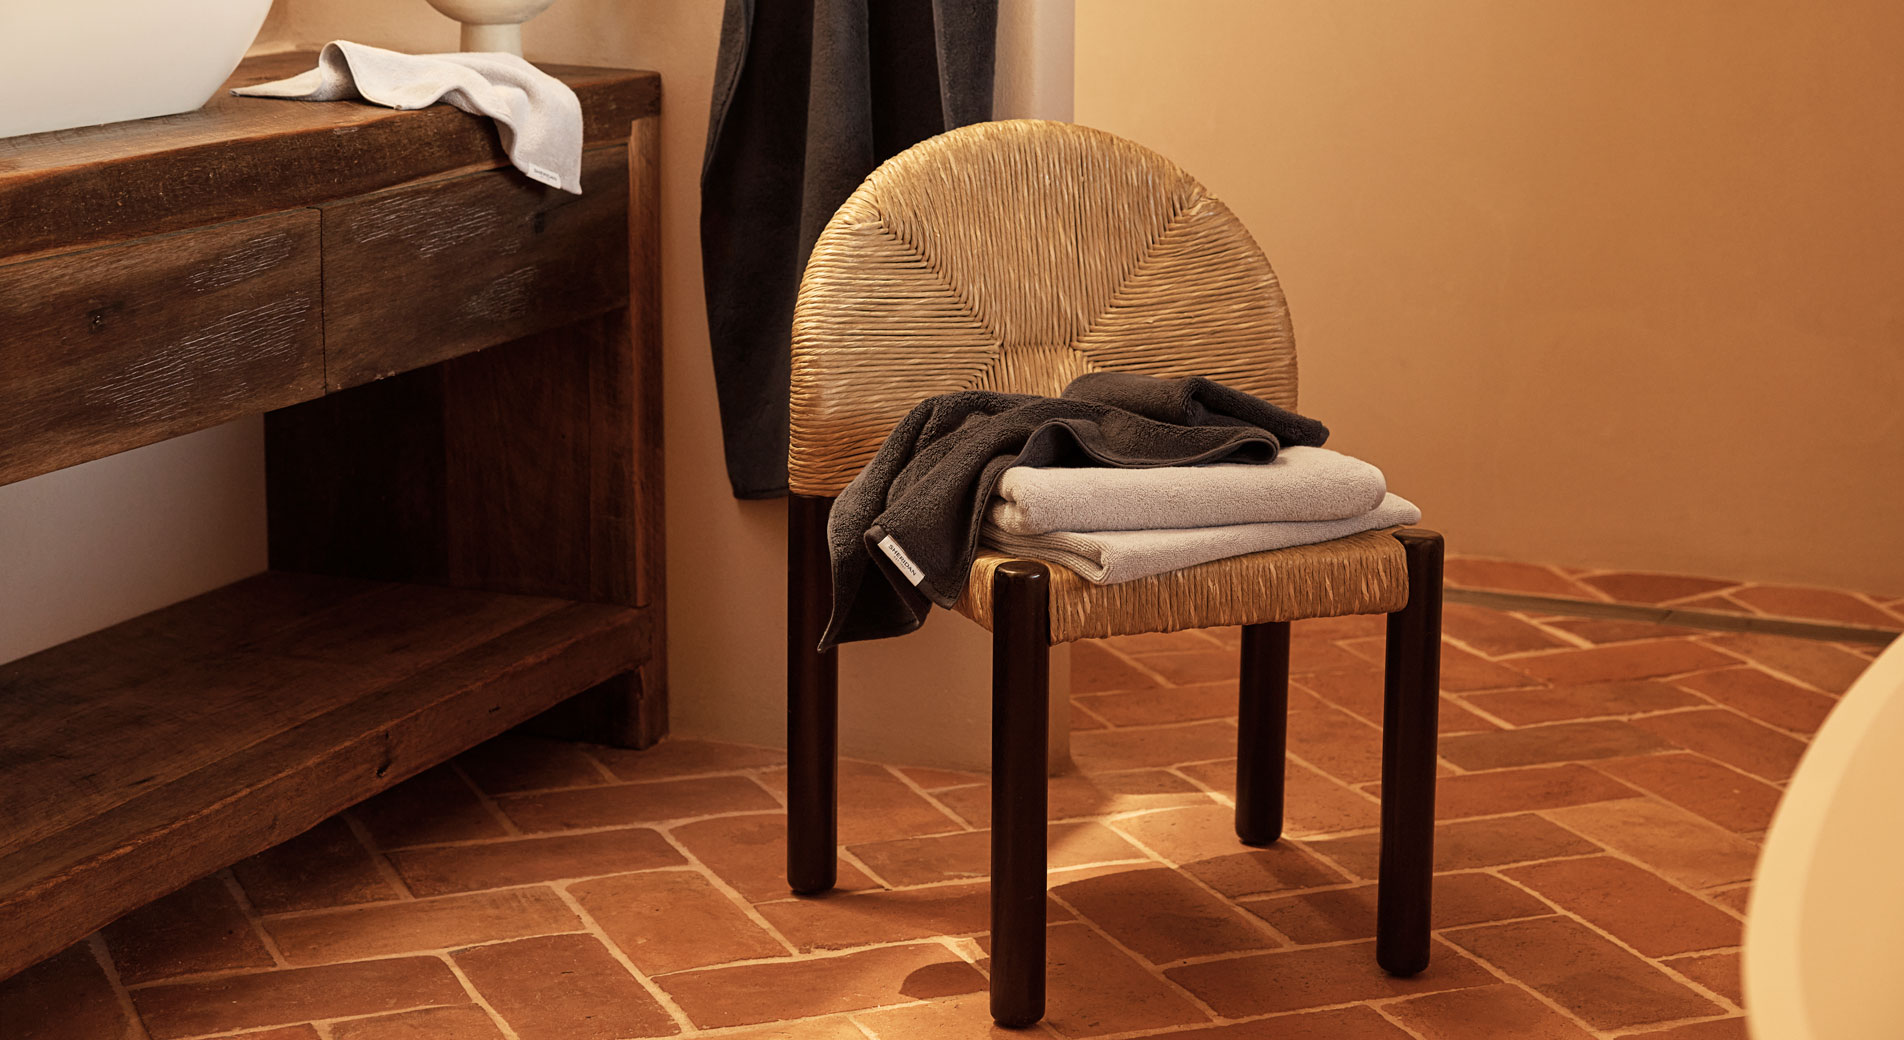 A wicker chair in the middle of a bathroom. On top is a stack of folded towels.